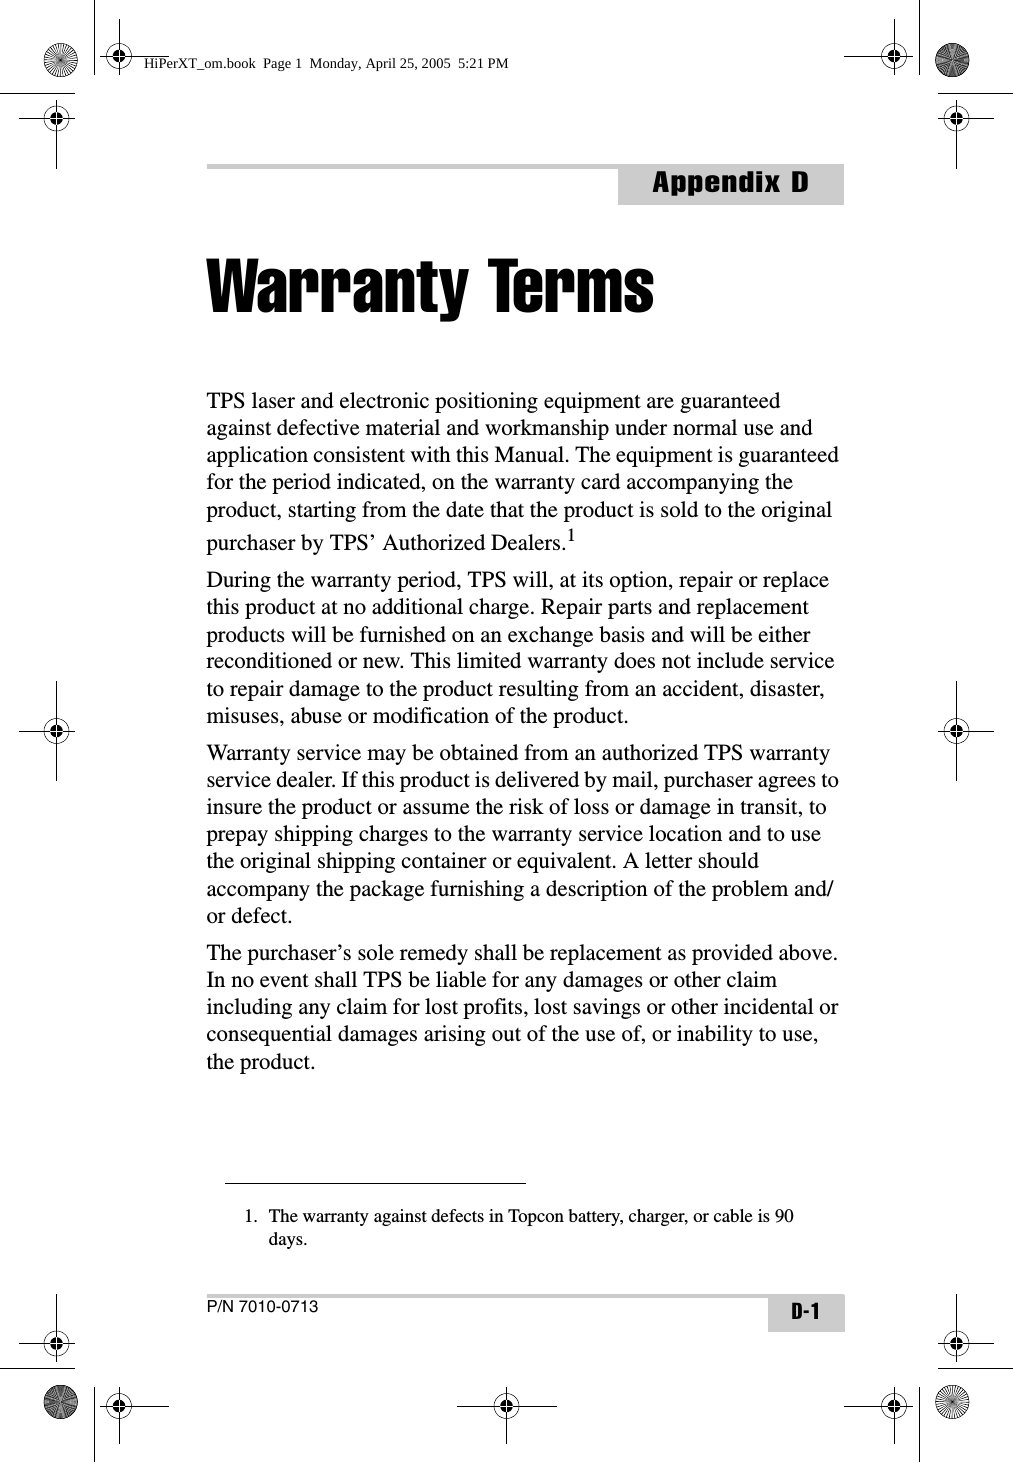 P/N 7010-0713Appendix DD-1Warranty TermsTPS laser and electronic positioning equipment are guaranteed against defective material and workmanship under normal use and application consistent with this Manual. The equipment is guaranteed for the period indicated, on the warranty card accompanying the product, starting from the date that the product is sold to the original purchaser by TPS’ Authorized Dealers.1During the warranty period, TPS will, at its option, repair or replace this product at no additional charge. Repair parts and replacement products will be furnished on an exchange basis and will be either reconditioned or new. This limited warranty does not include service to repair damage to the product resulting from an accident, disaster, misuses, abuse or modification of the product.Warranty service may be obtained from an authorized TPS warranty service dealer. If this product is delivered by mail, purchaser agrees to insure the product or assume the risk of loss or damage in transit, to prepay shipping charges to the warranty service location and to use the original shipping container or equivalent. A letter should accompany the package furnishing a description of the problem and/or defect.The purchaser’s sole remedy shall be replacement as provided above. In no event shall TPS be liable for any damages or other claim including any claim for lost profits, lost savings or other incidental or consequential damages arising out of the use of, or inability to use, the product.1. The warranty against defects in Topcon battery, charger, or cable is 90 days.HiPerXT_om.book  Page 1  Monday, April 25, 2005  5:21 PM